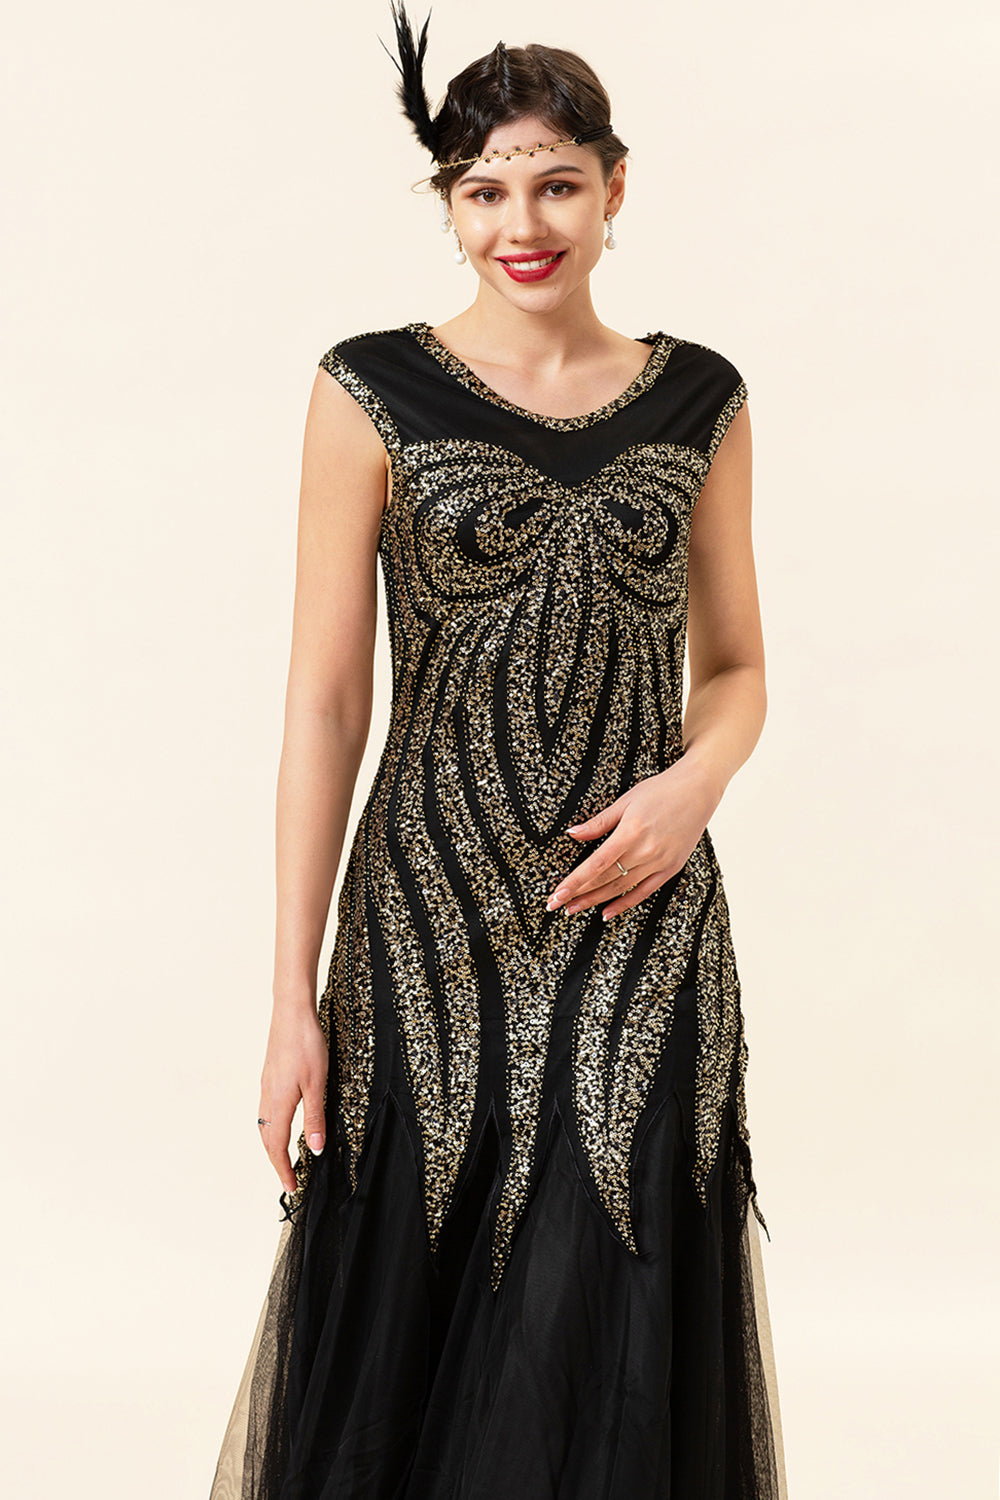 Black Sequins Tulle Flapper Dress with 1920s Accessories Set